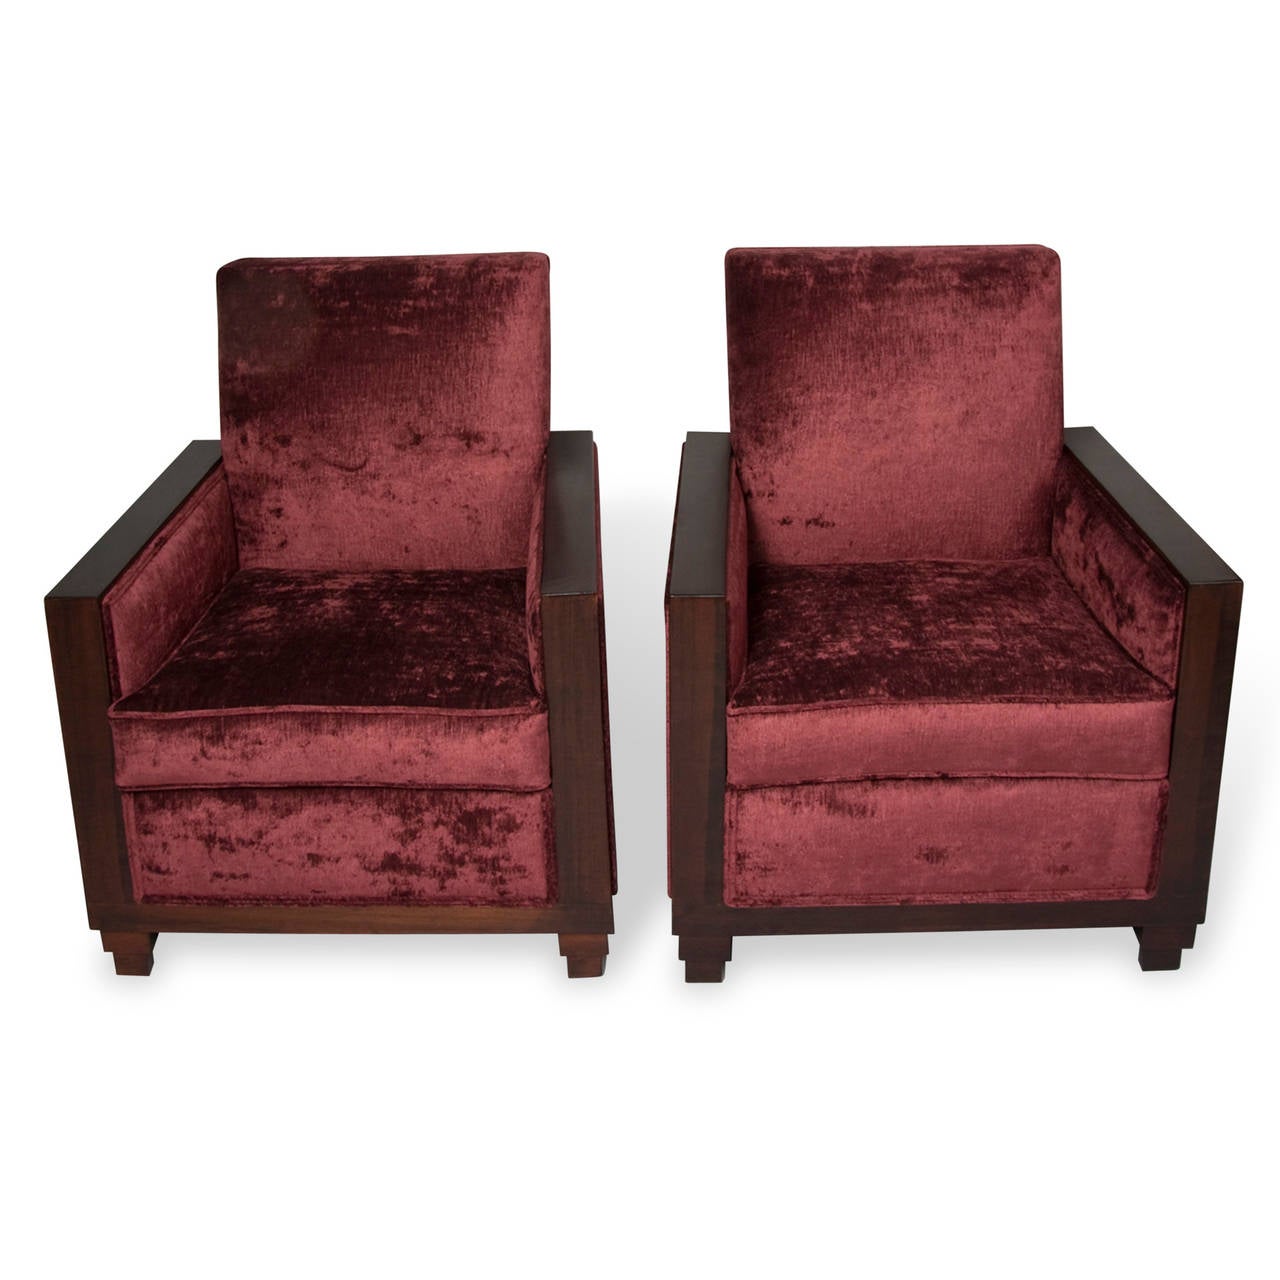 Pair of mahogany frame armchairs, with raised backs, the mahogany wrapping around the entire border of the sides, on stepped bases, French, 1930s. Newly upholstered in a deep burgundy velvet blend. Back height 36 in, width 29 1/2 in, depth 25 1/2